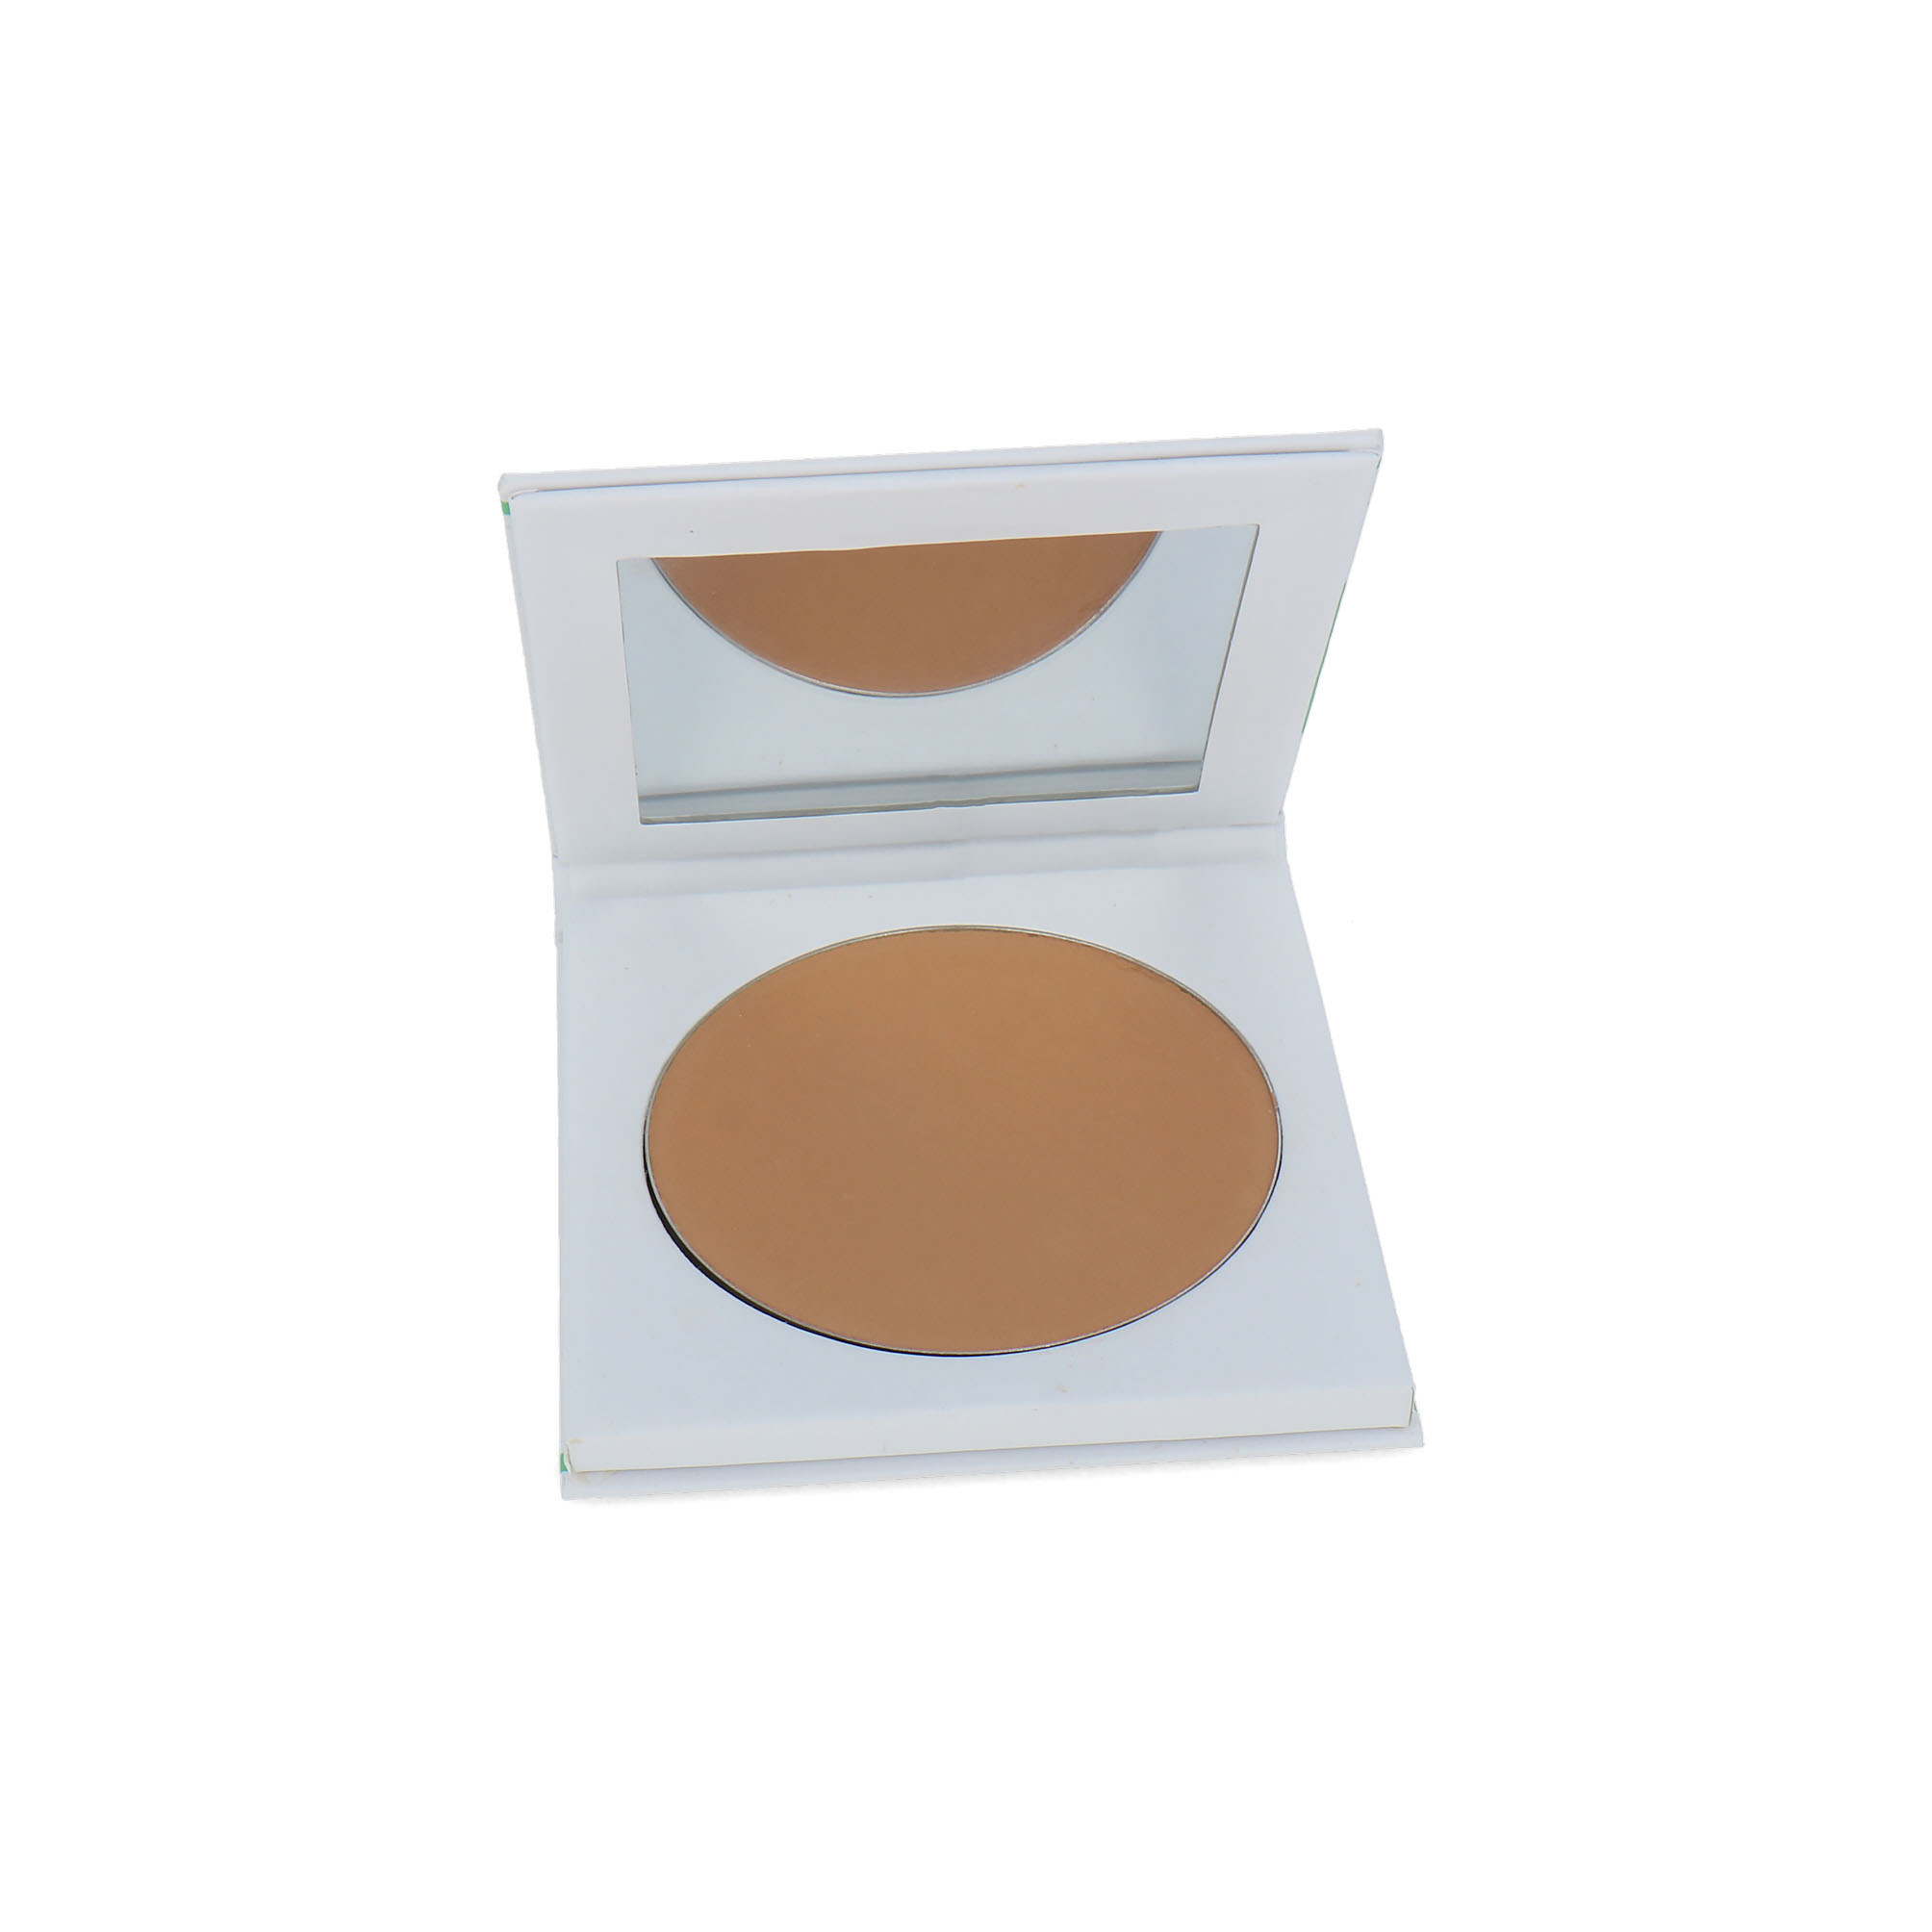 PHB Ethical Beauty Pressed Mineral Fond de teint - Caramel